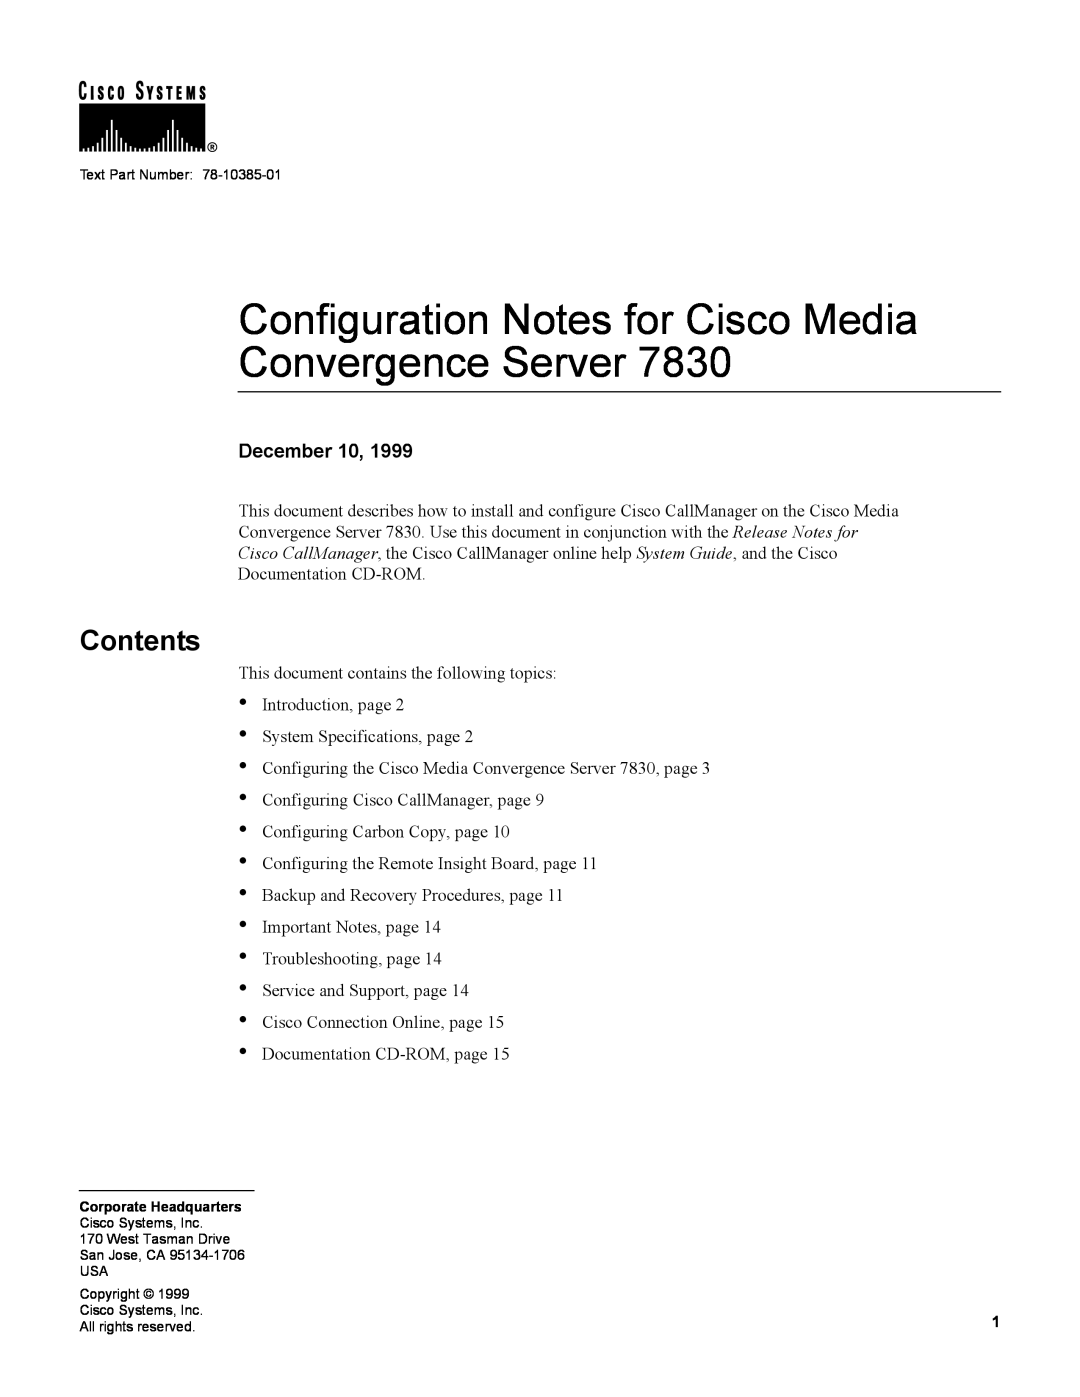 Cisco Systems 7830 specifications Contents, Configuration Notes for Cisco Media Convergence Server, December 